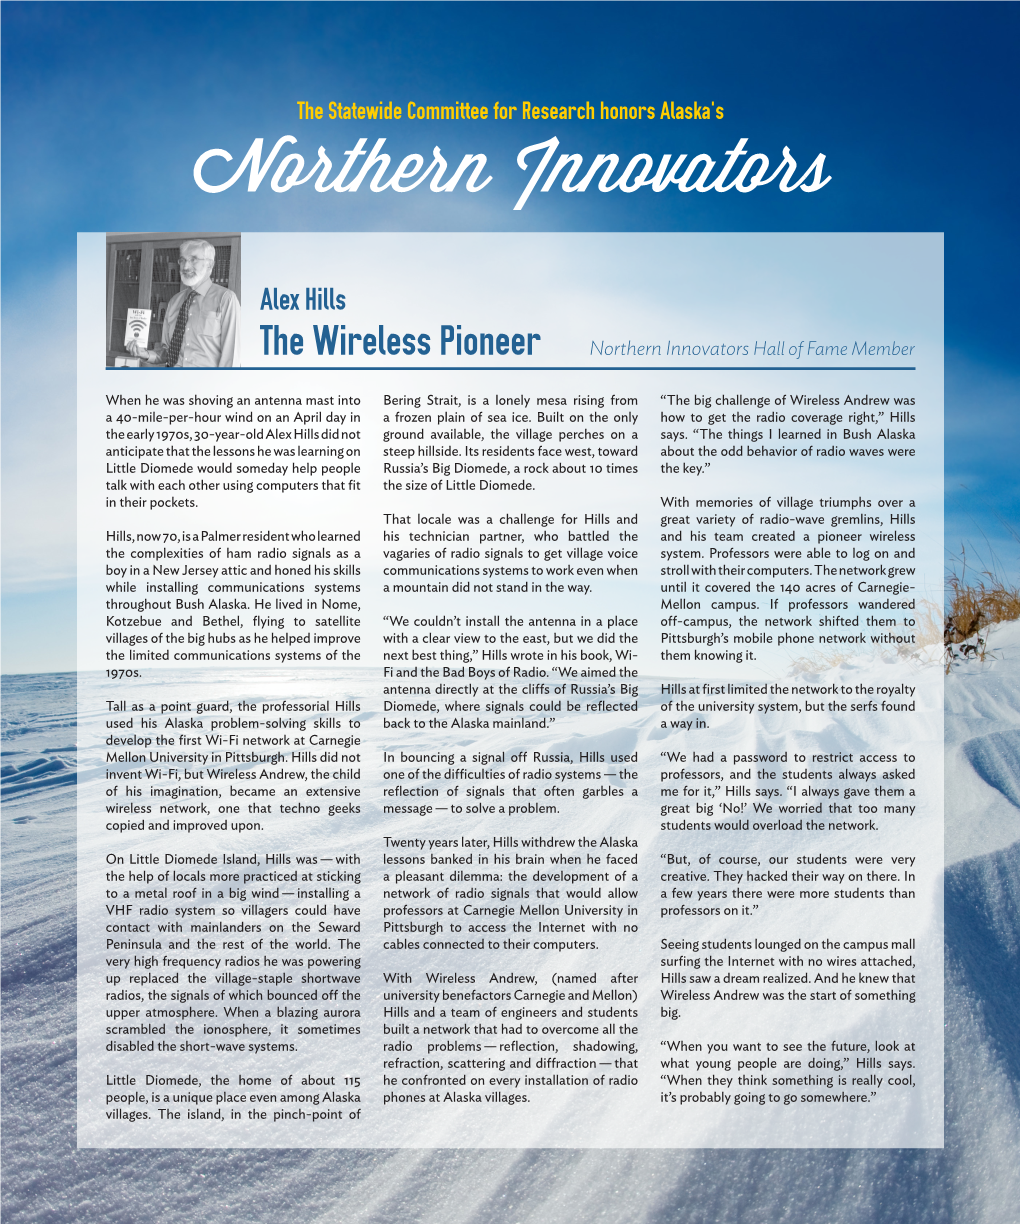 The Wireless Pioneer Northern Innovators Hall of Fame Member